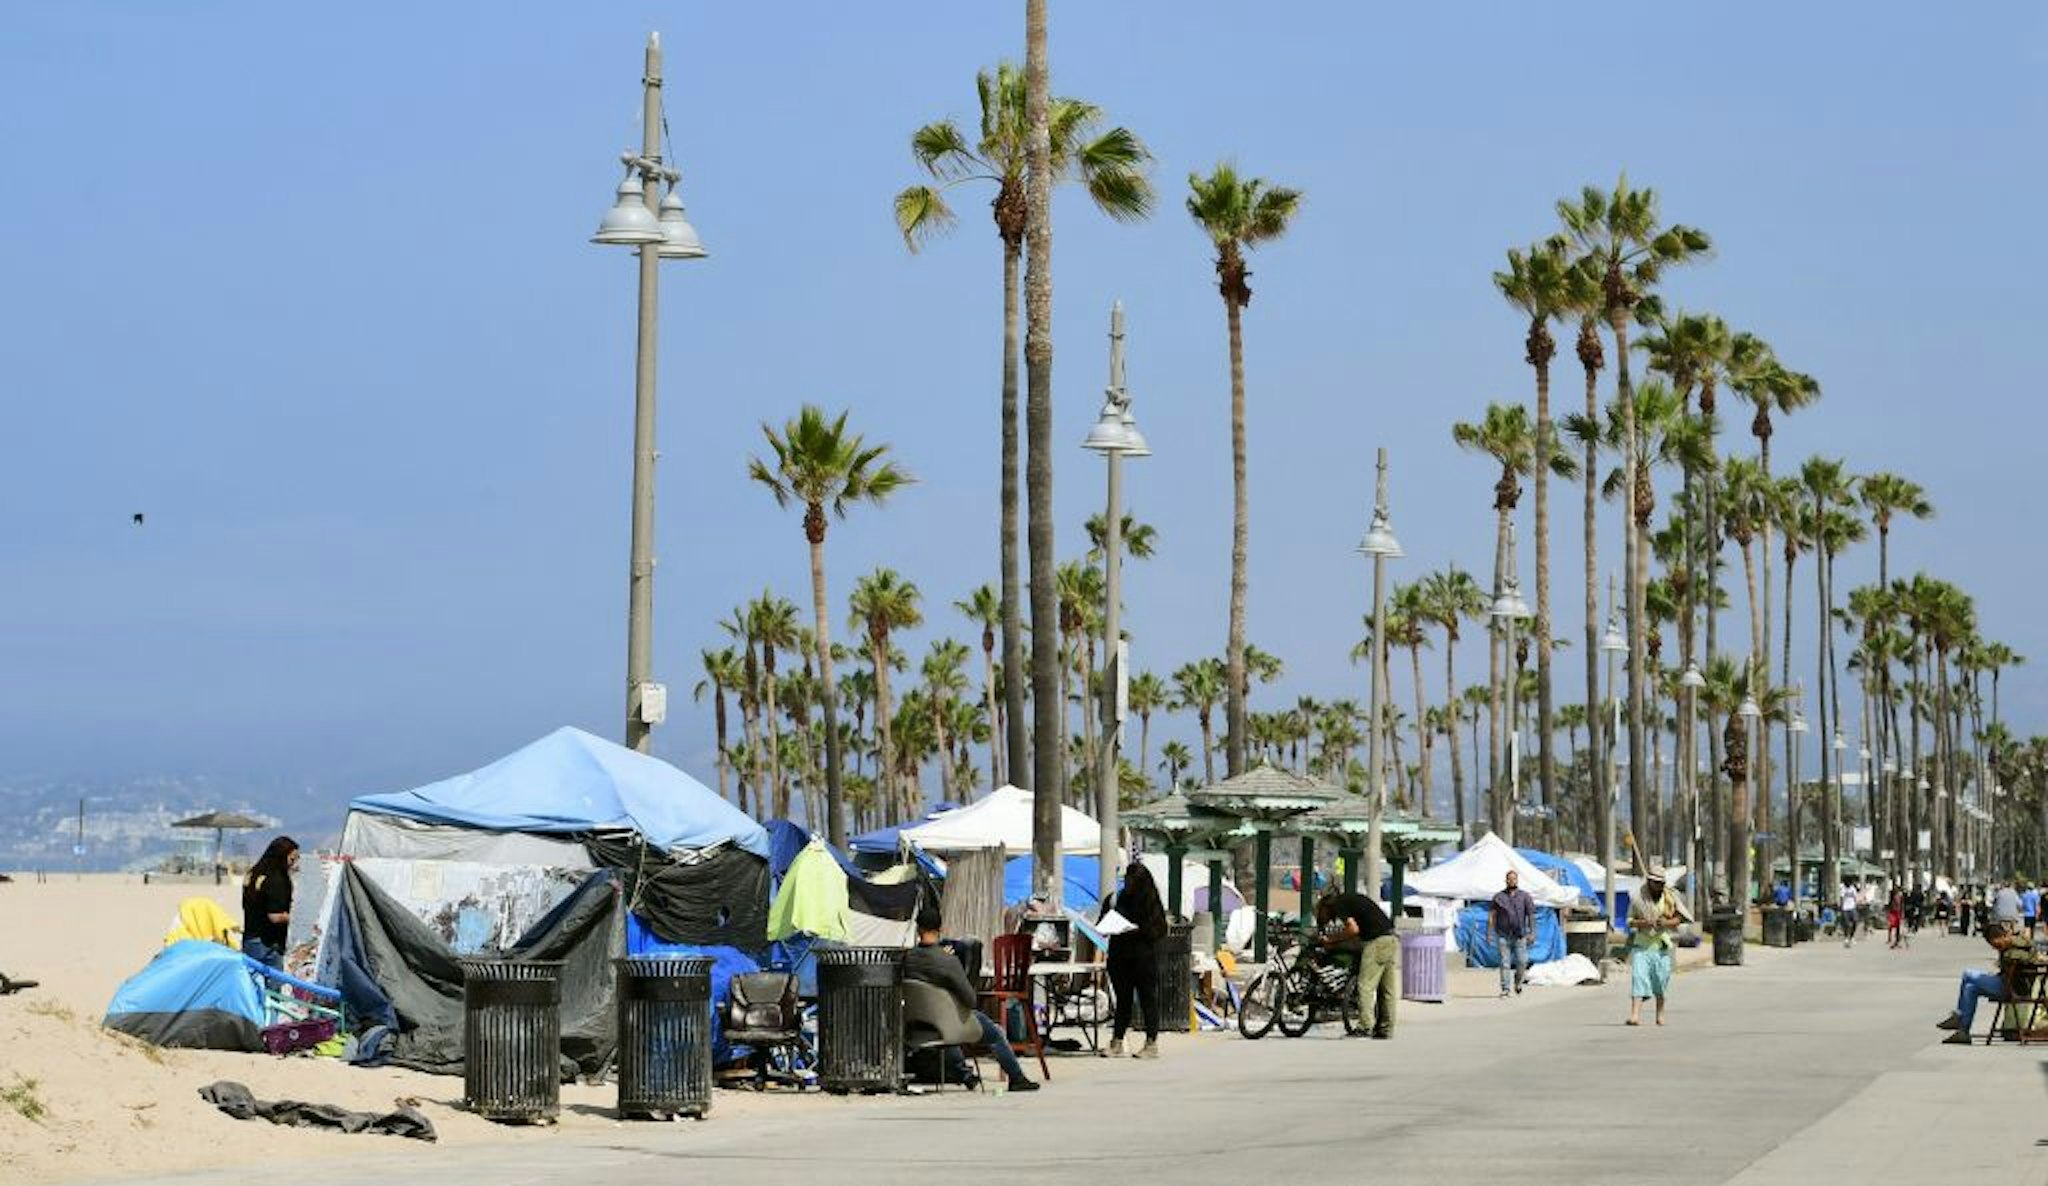 Tents line the Ocean Front Walk on June 30, 2021 in Venice, California, where an initiative began this week offering people in homeless encampments a voluntary path to permanent housing. - Homeless encampments at the famed Venice Beach has grown during the coronavirus pandemic, turning into a political flashpoint, with signs posted on trees warning of a July 2 clearance of all homeless encampments ahead of the July 4th weekend. (Photo by Frederic J. BROWN / AFP) (Photo by FREDERIC J. BROWN/AFP via Getty Images)